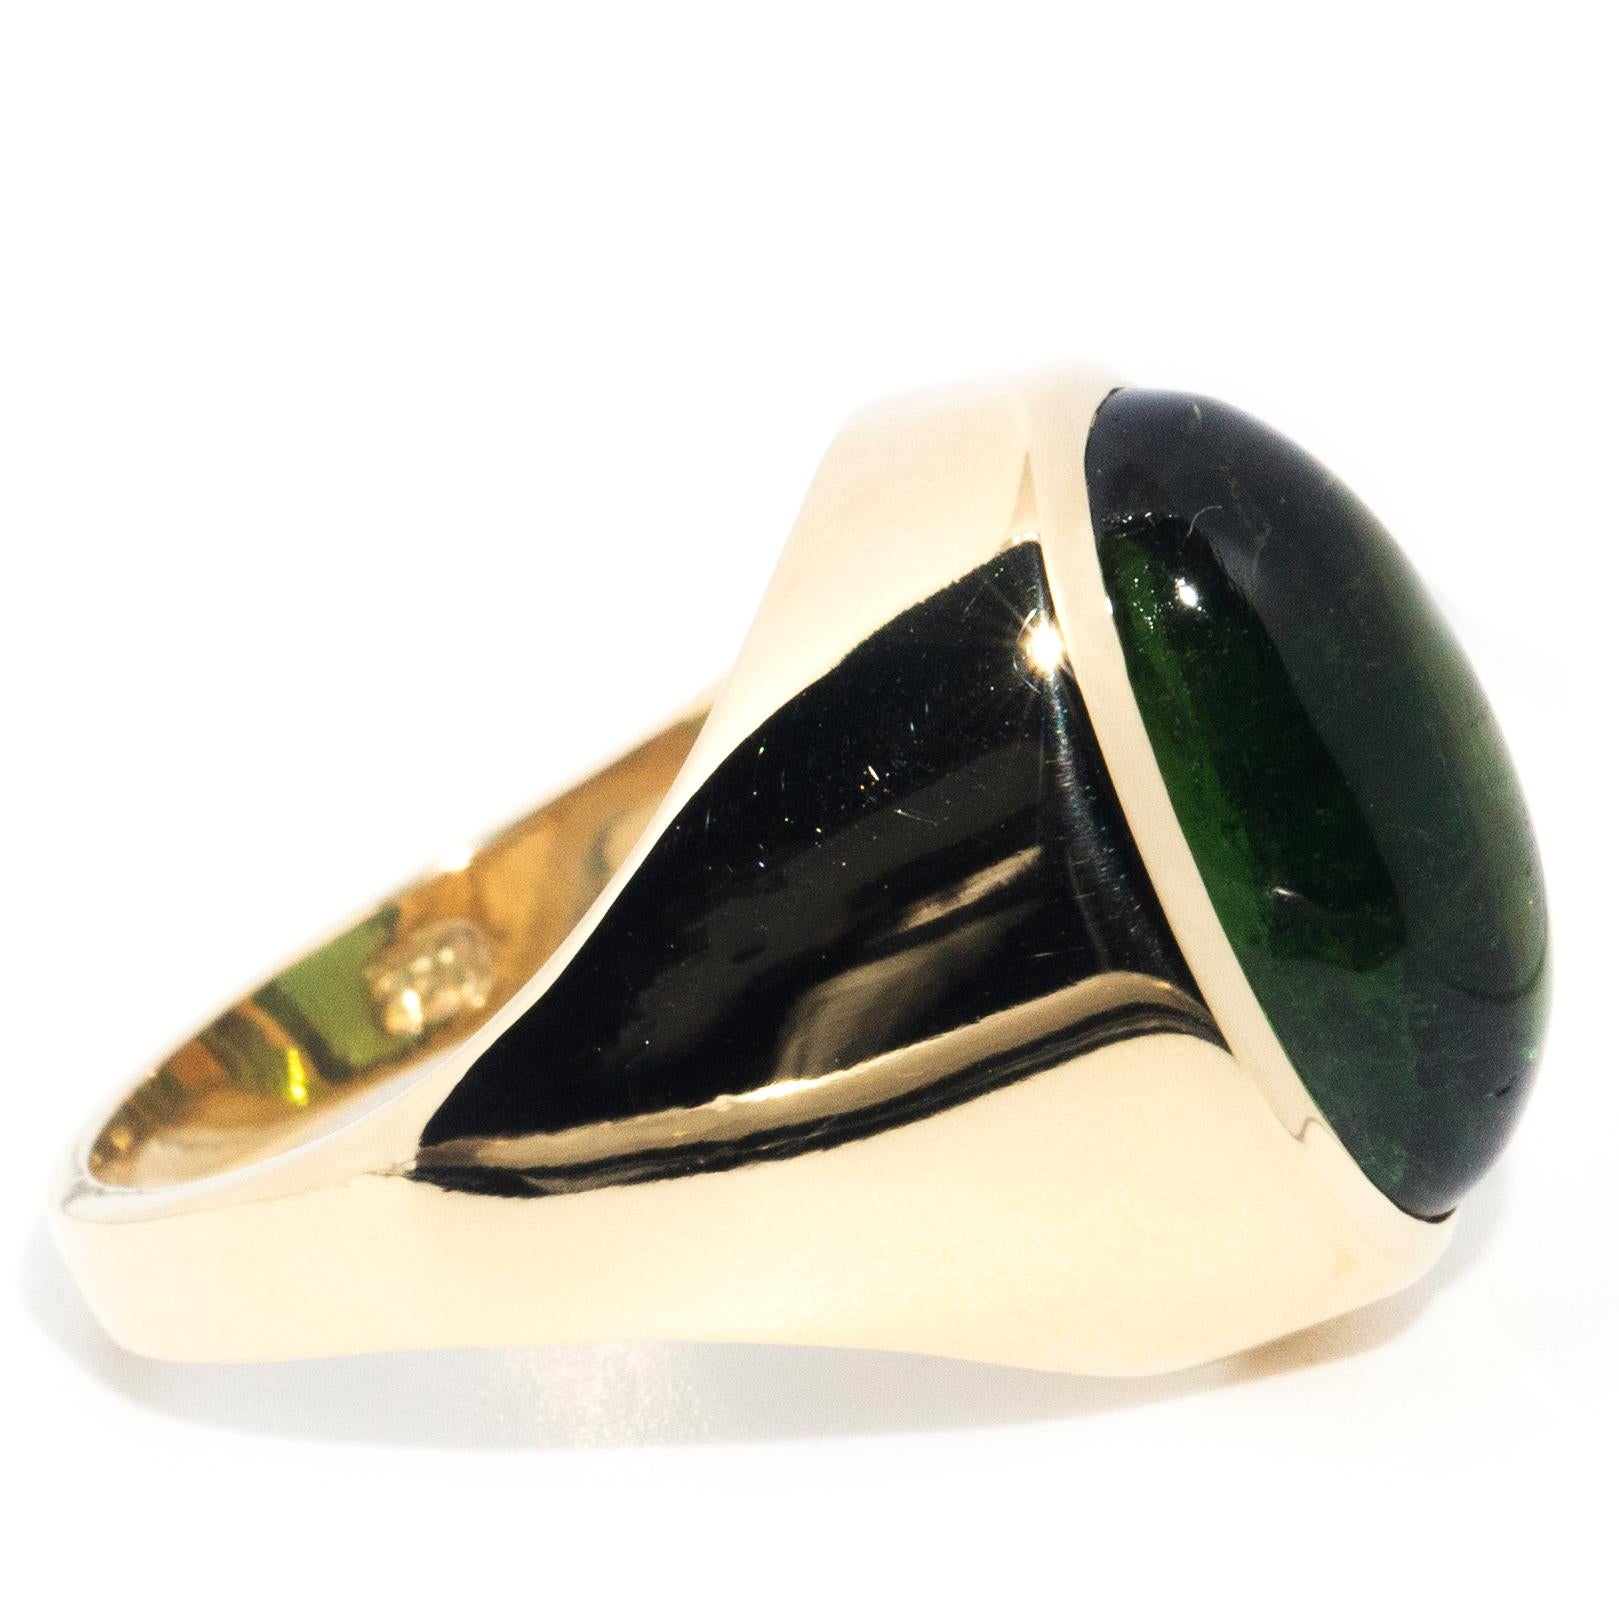 Oval Cabochon Cut Green Tourmaline Contemporary 18 Carat Gold Engagement Ring In Good Condition For Sale In Hamilton, AU